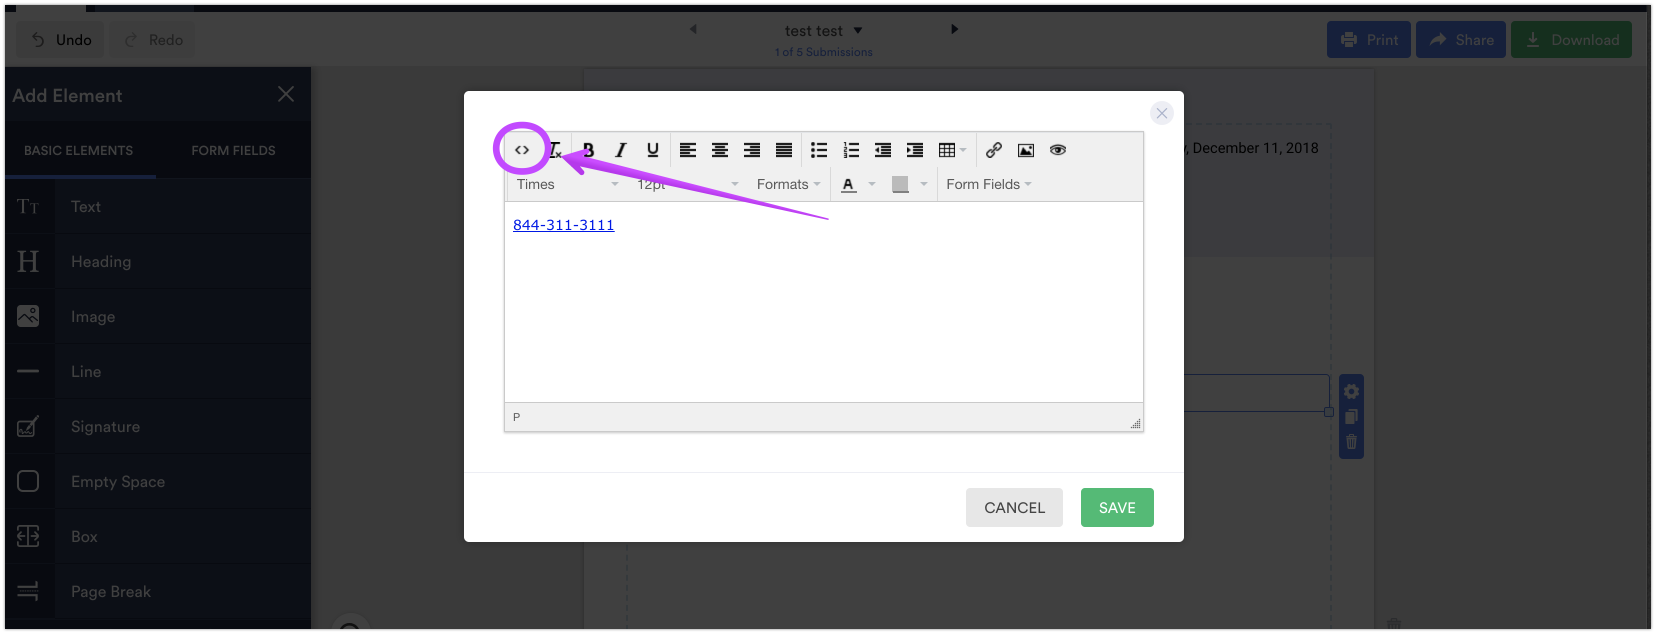 How do we create a link on a form to make phone number clickable in mobile device? Image 1 Screenshot 20